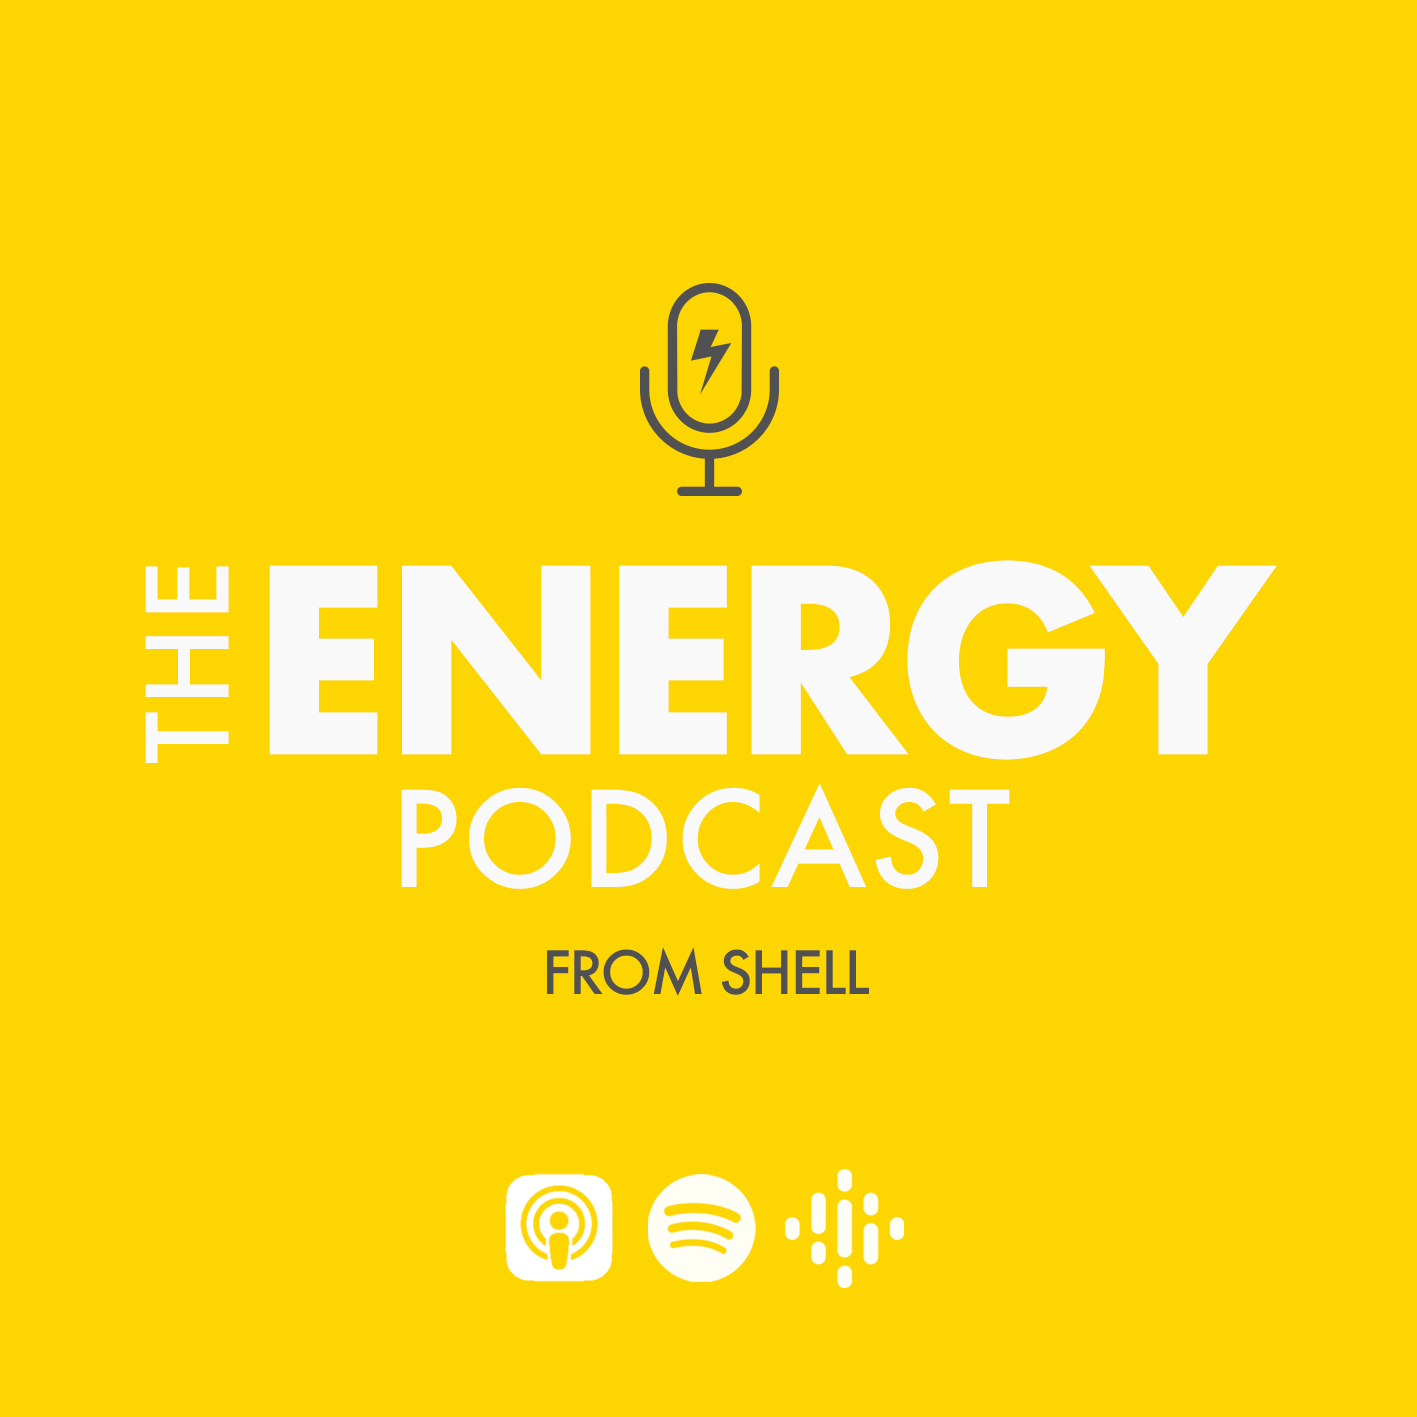 The Energy Podcast